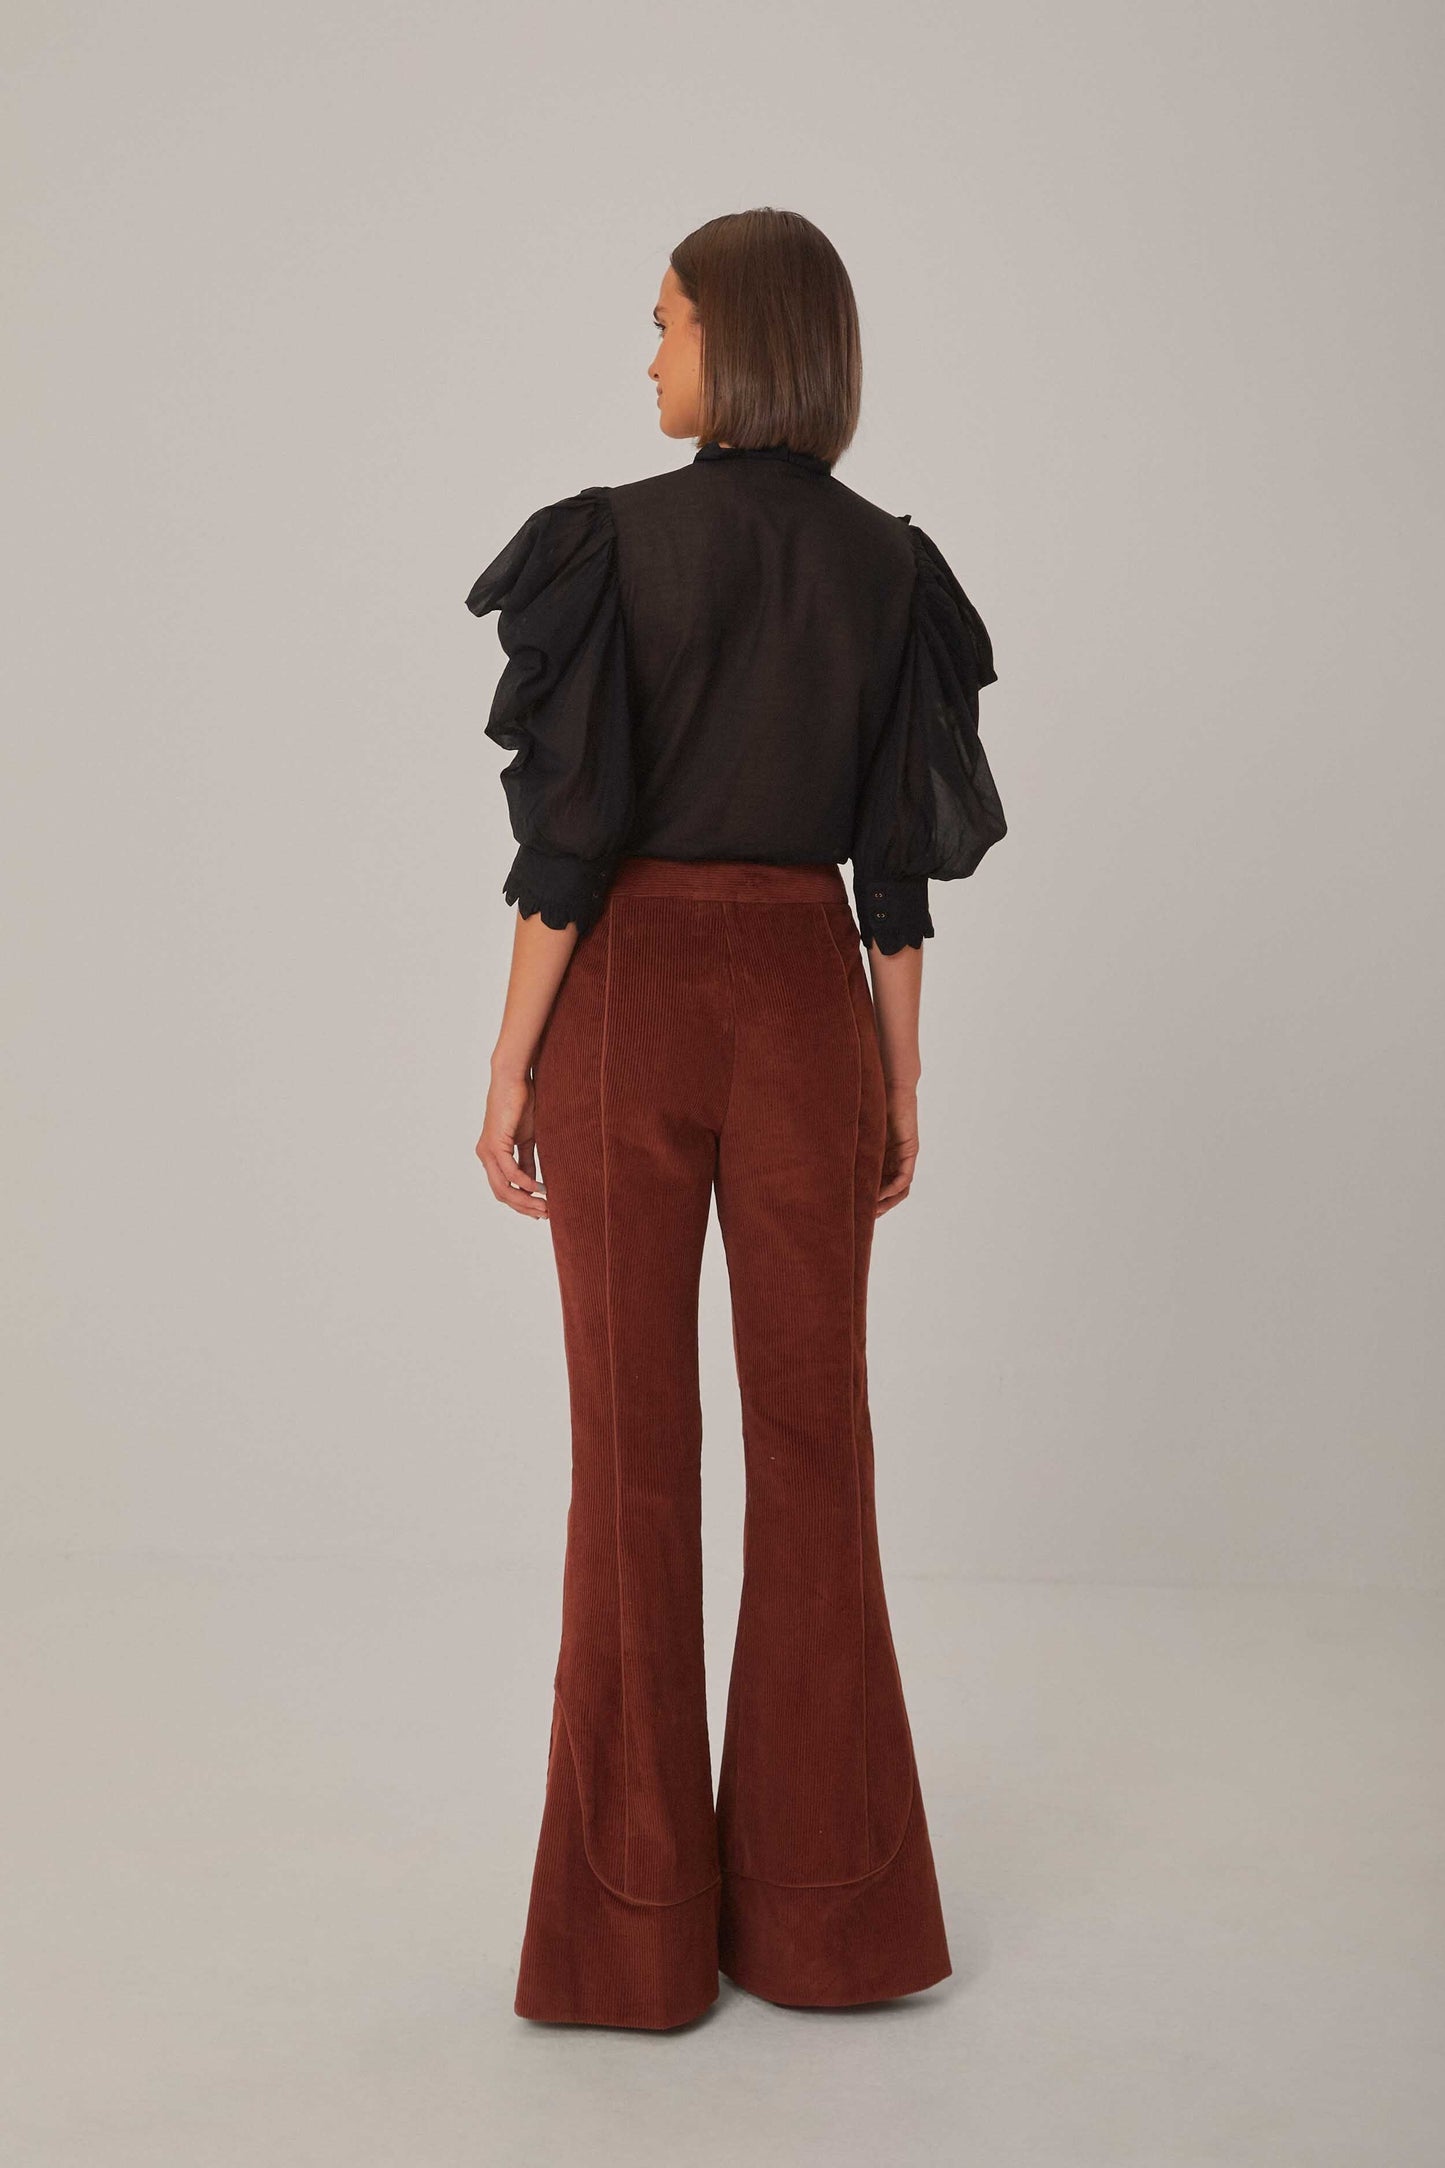 CHANCE Brown Corduroy Flare Trousers